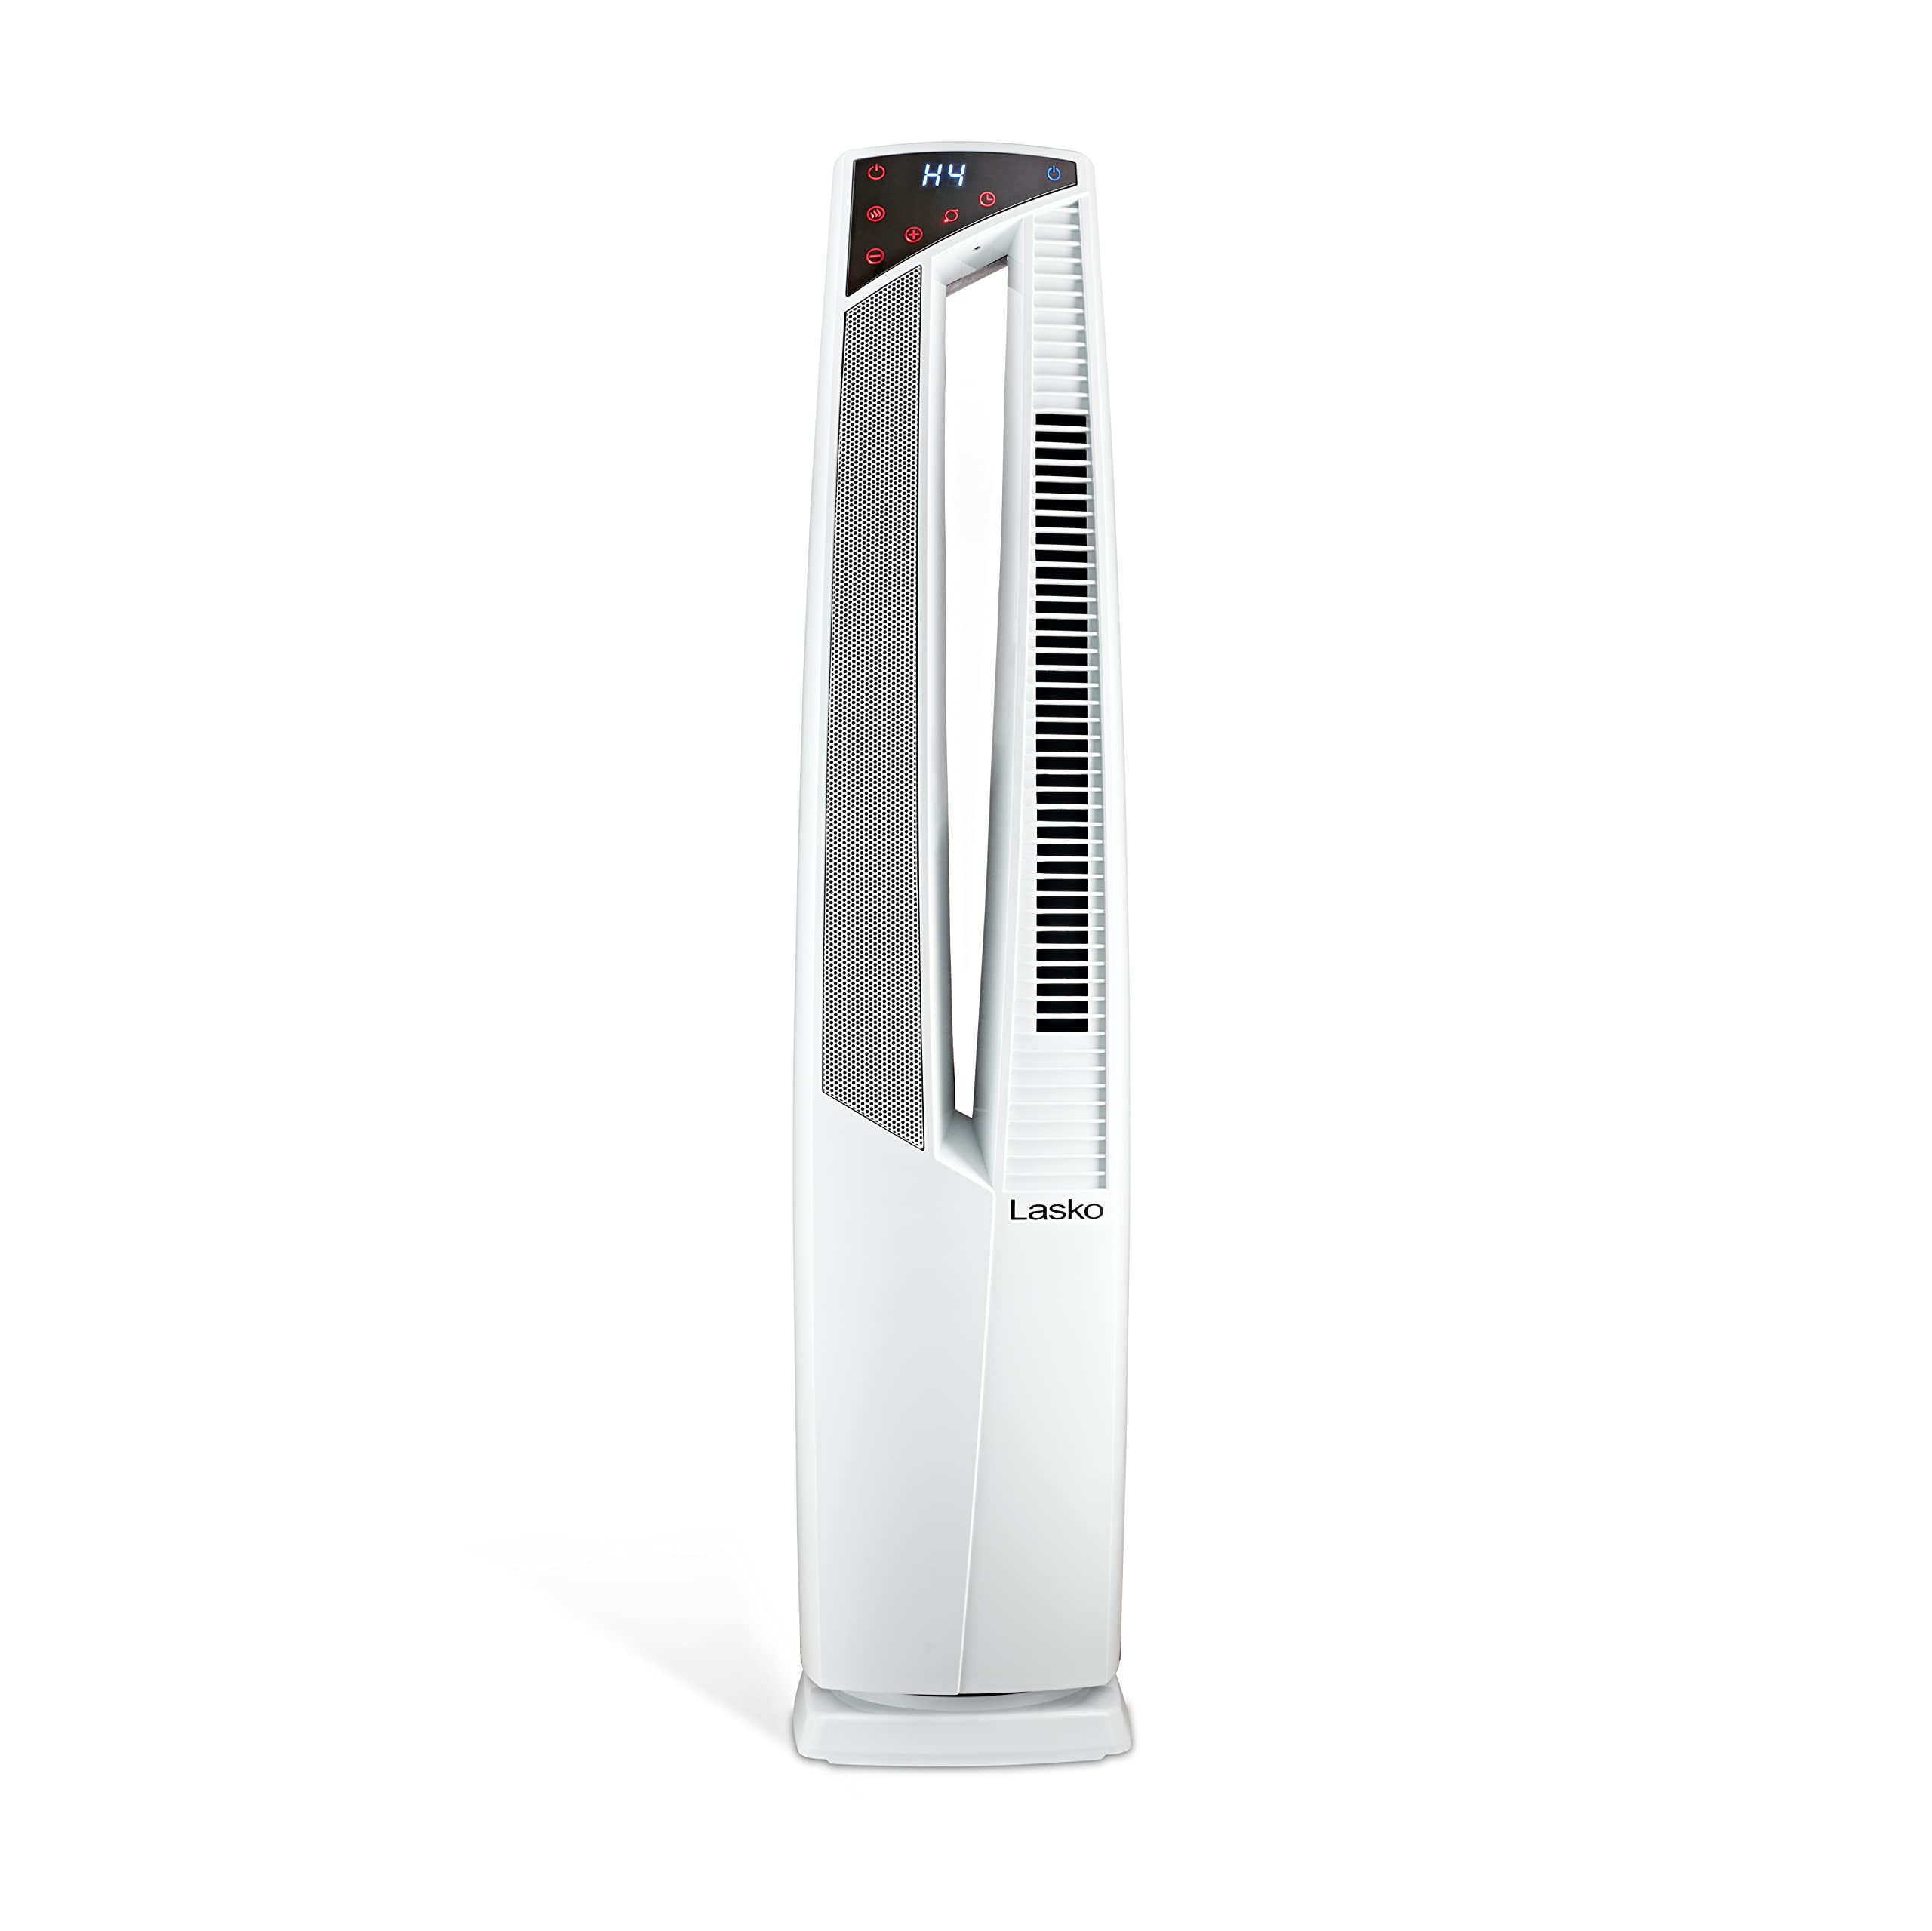 Lasko Oscillating Hybrid Fan and Space Heater for Home, All Season High Velocity Hybrid with Tip-Over Switch, Remote Control, Timer and Thermostat, 37.5 Inches, White, 1500W, FHV820